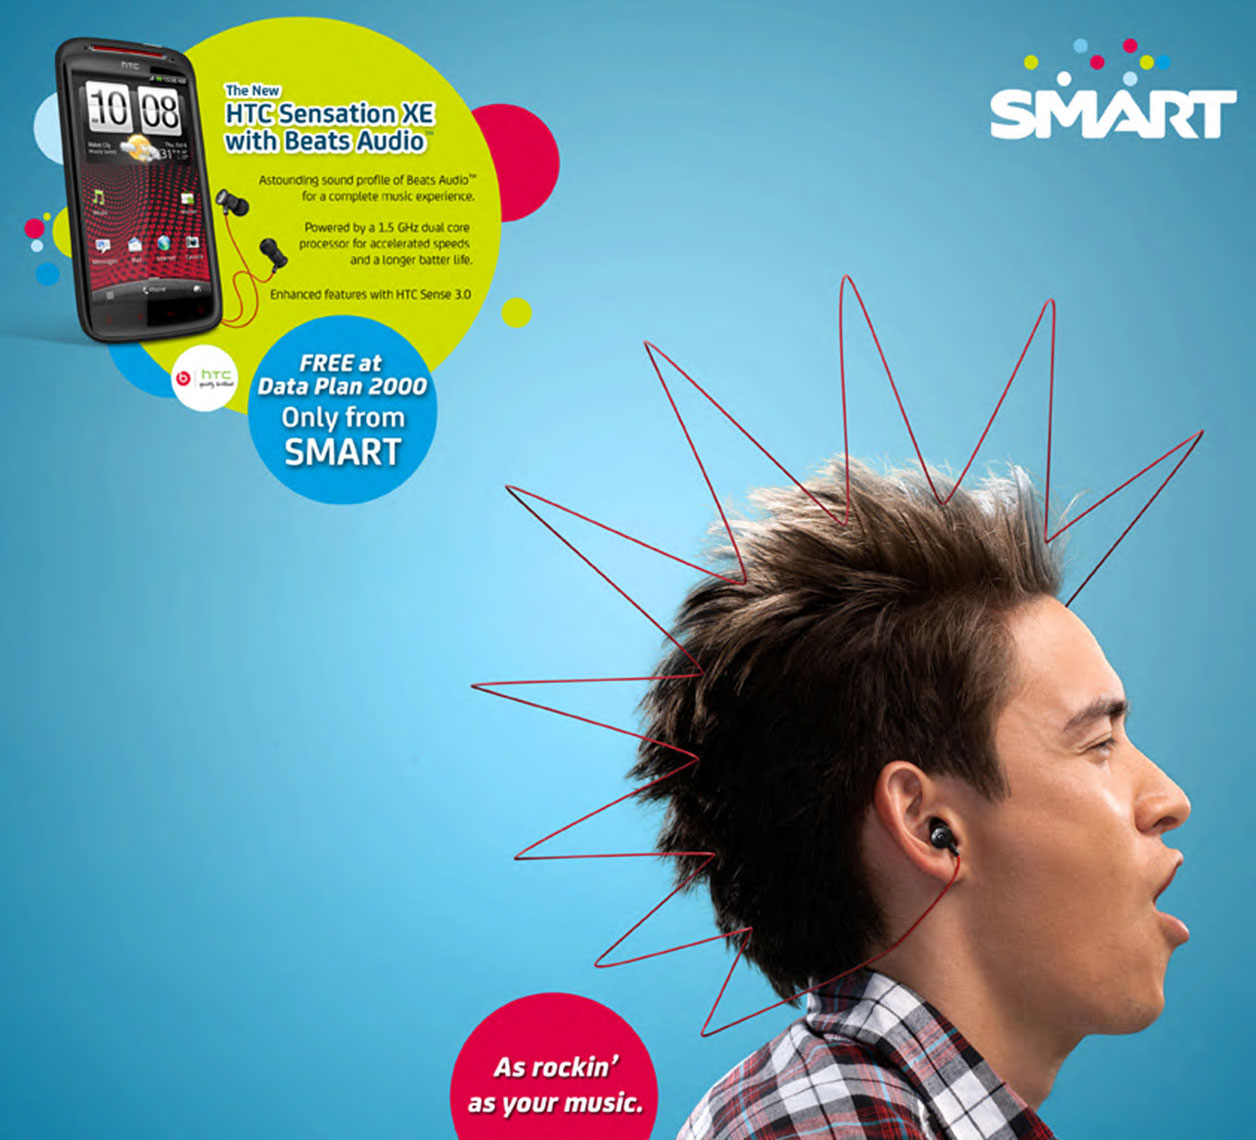 smart-now-offers-the-new-htc-xe-with-beats